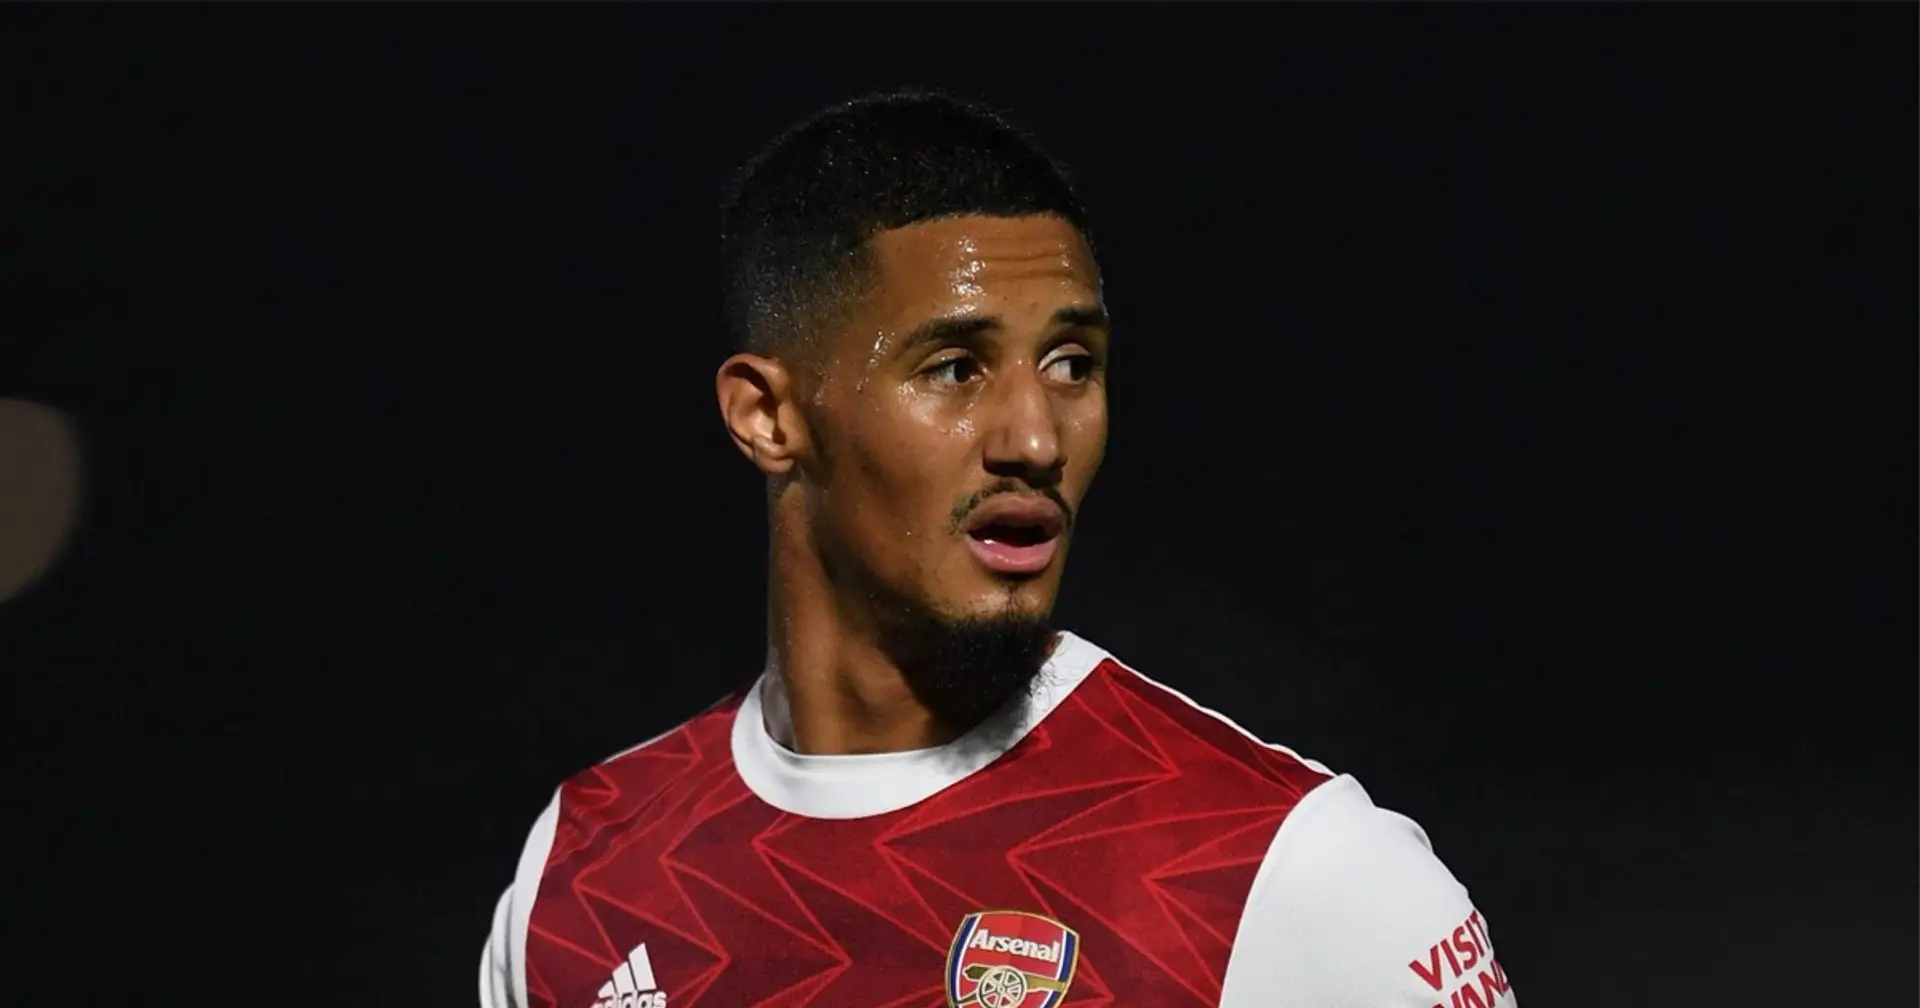 'He's made massive improvements in the last few months': Mikel Arteta on possibility of loaning William Saliba out in January